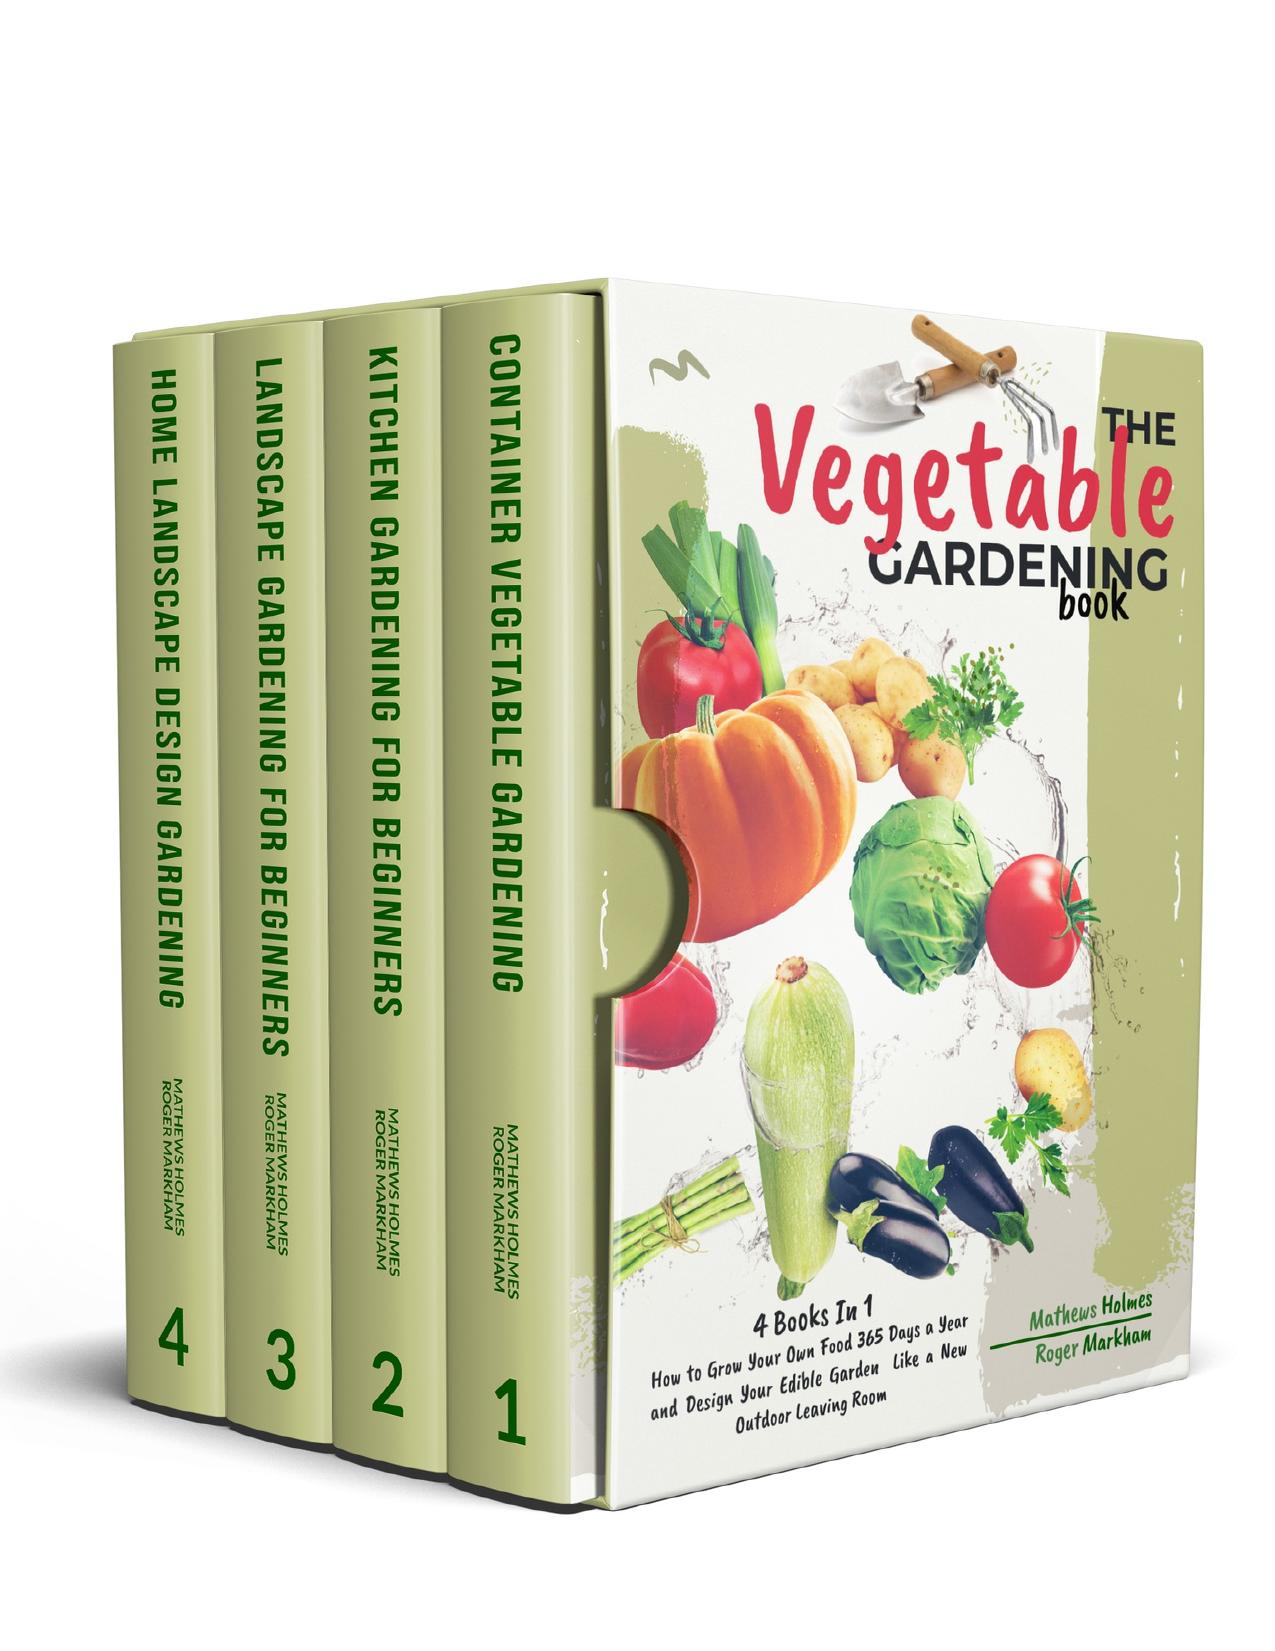 The Vegetables Gardening : 4 Books In 1, How to Grow Your Own Food 365 Days a Year and Design Your Edible Garden Like a New Outdoor Living Room (The Complete Gardeners Guide) by Markham Roger & Holmes Mathews